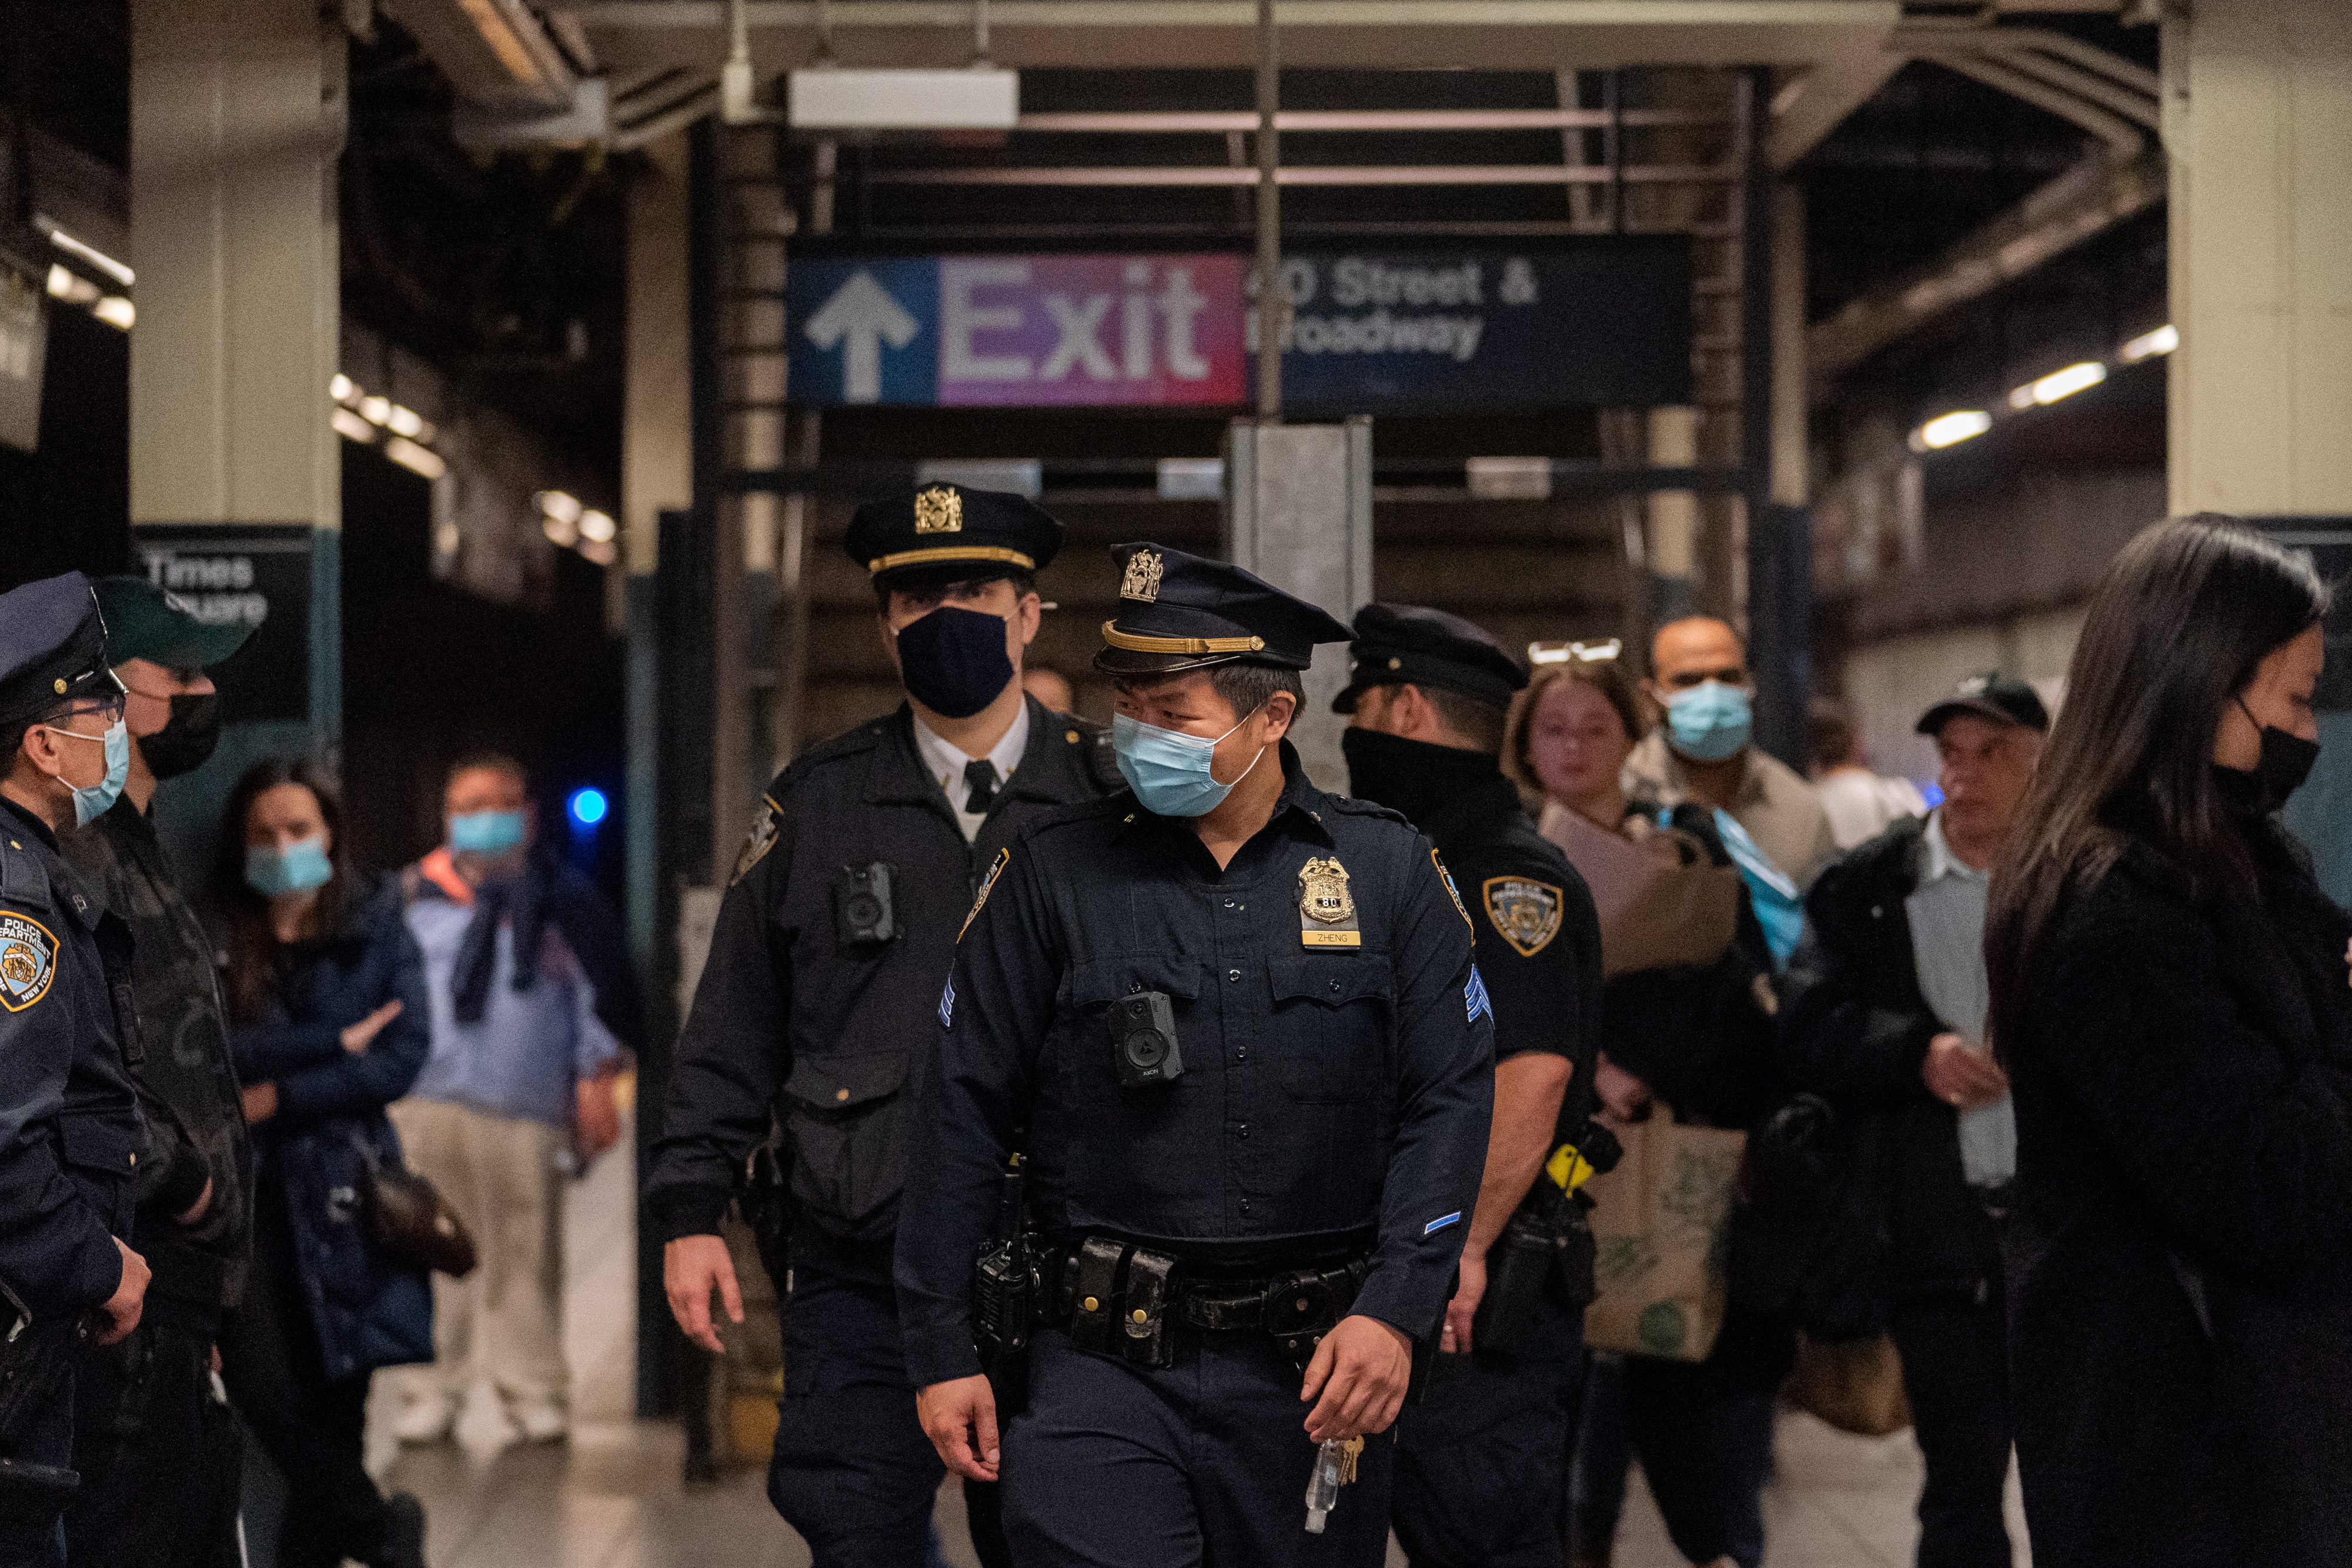 Police officers patrol in Times Square station, after a shooting at a subway station in Brooklyn borough, in Manhattan, New York City